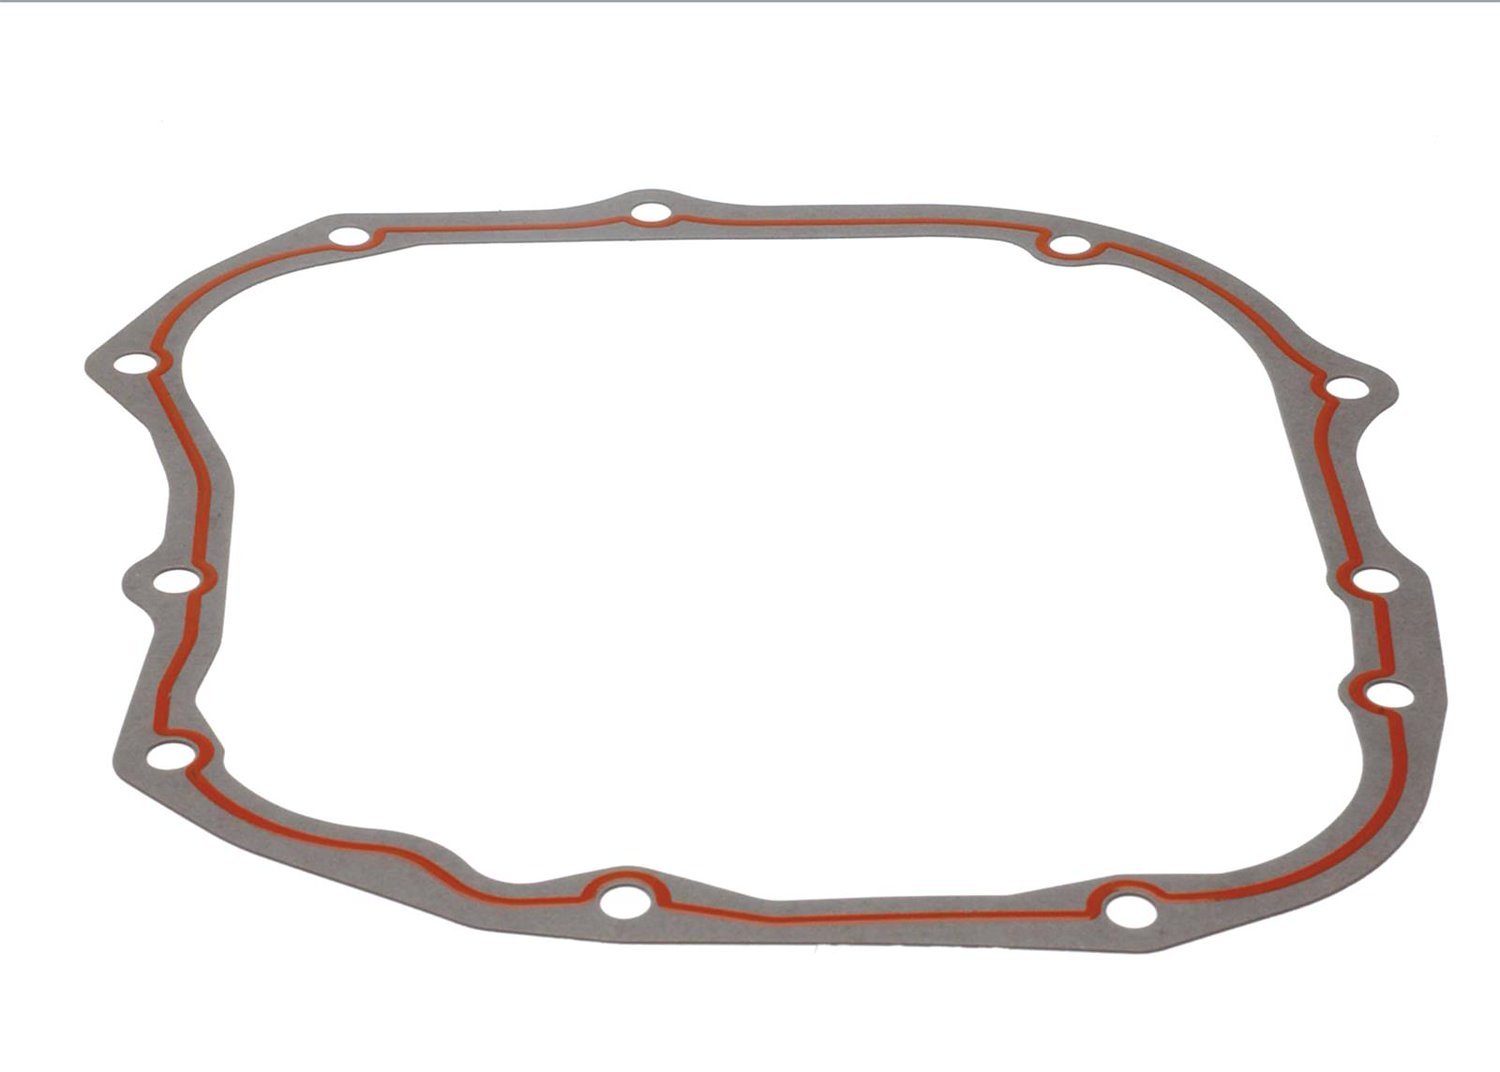 Valve Body Cover Gasket for Select 1982-2001 Buick,